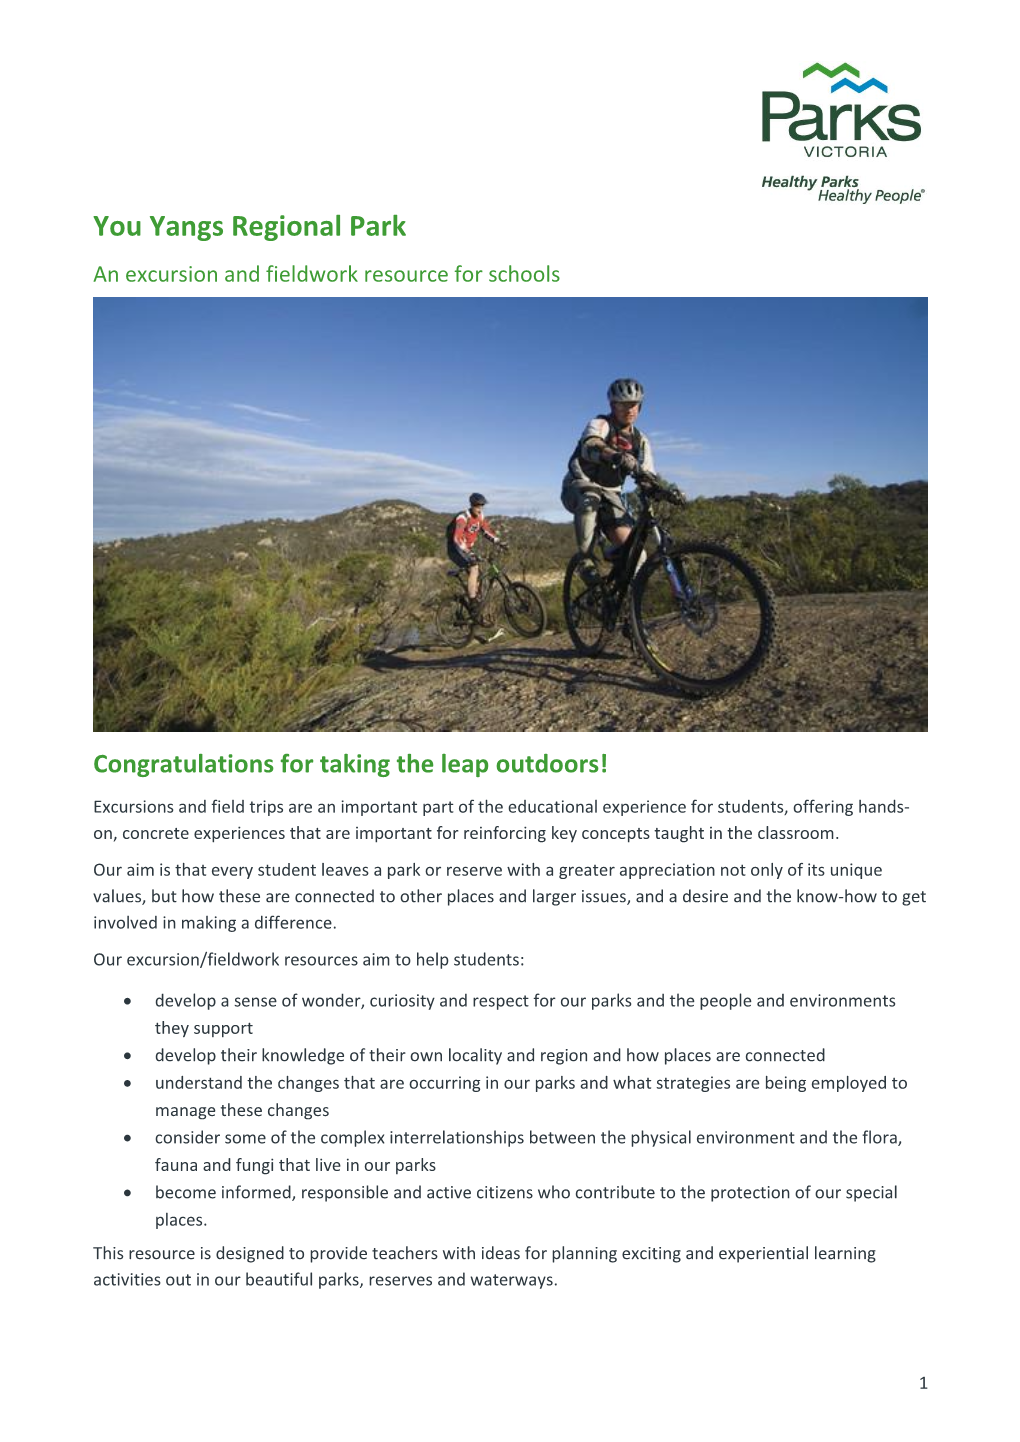 You Yangs Regional Park an Excursion and Fieldwork Resource for Schools